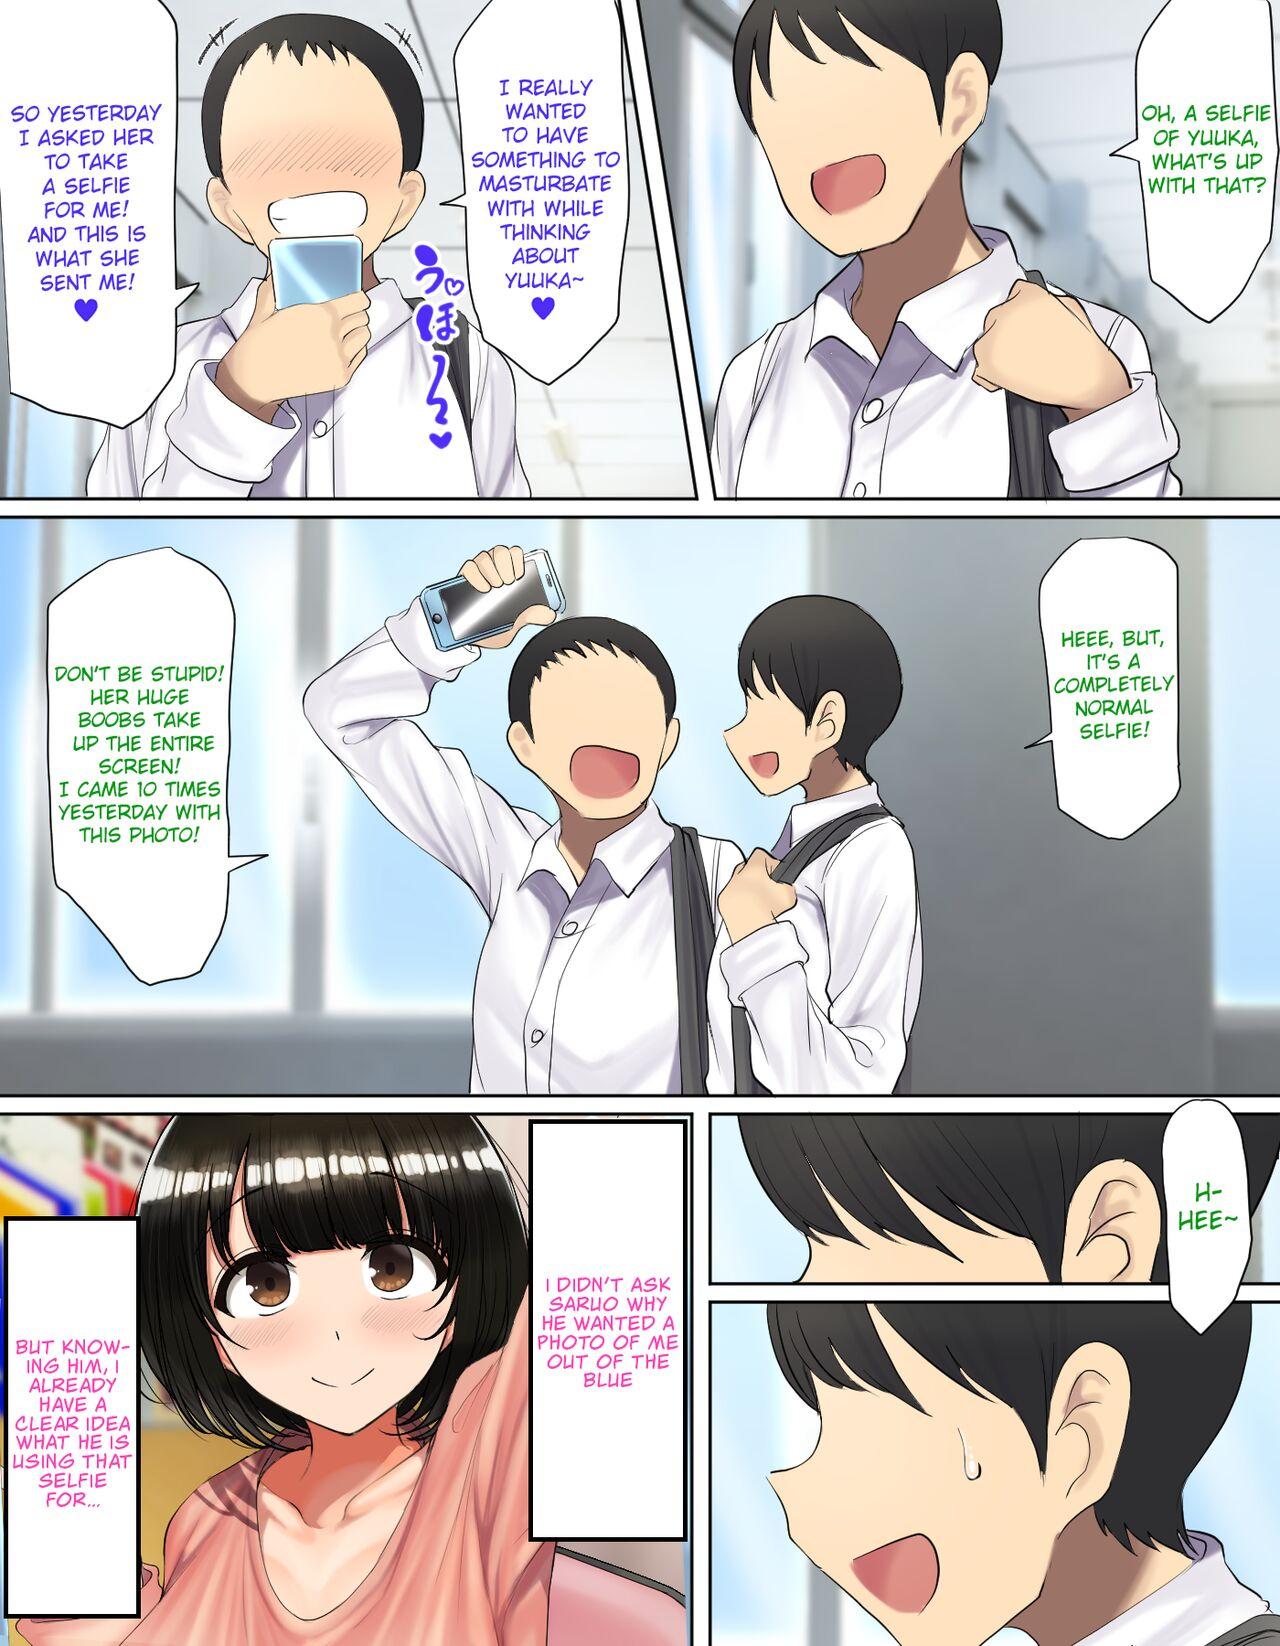 Chupando YUUKA'S VERSION of Because my childhood friend is not interested in sex, I fucked his friend instead - Original Pau - Page 10